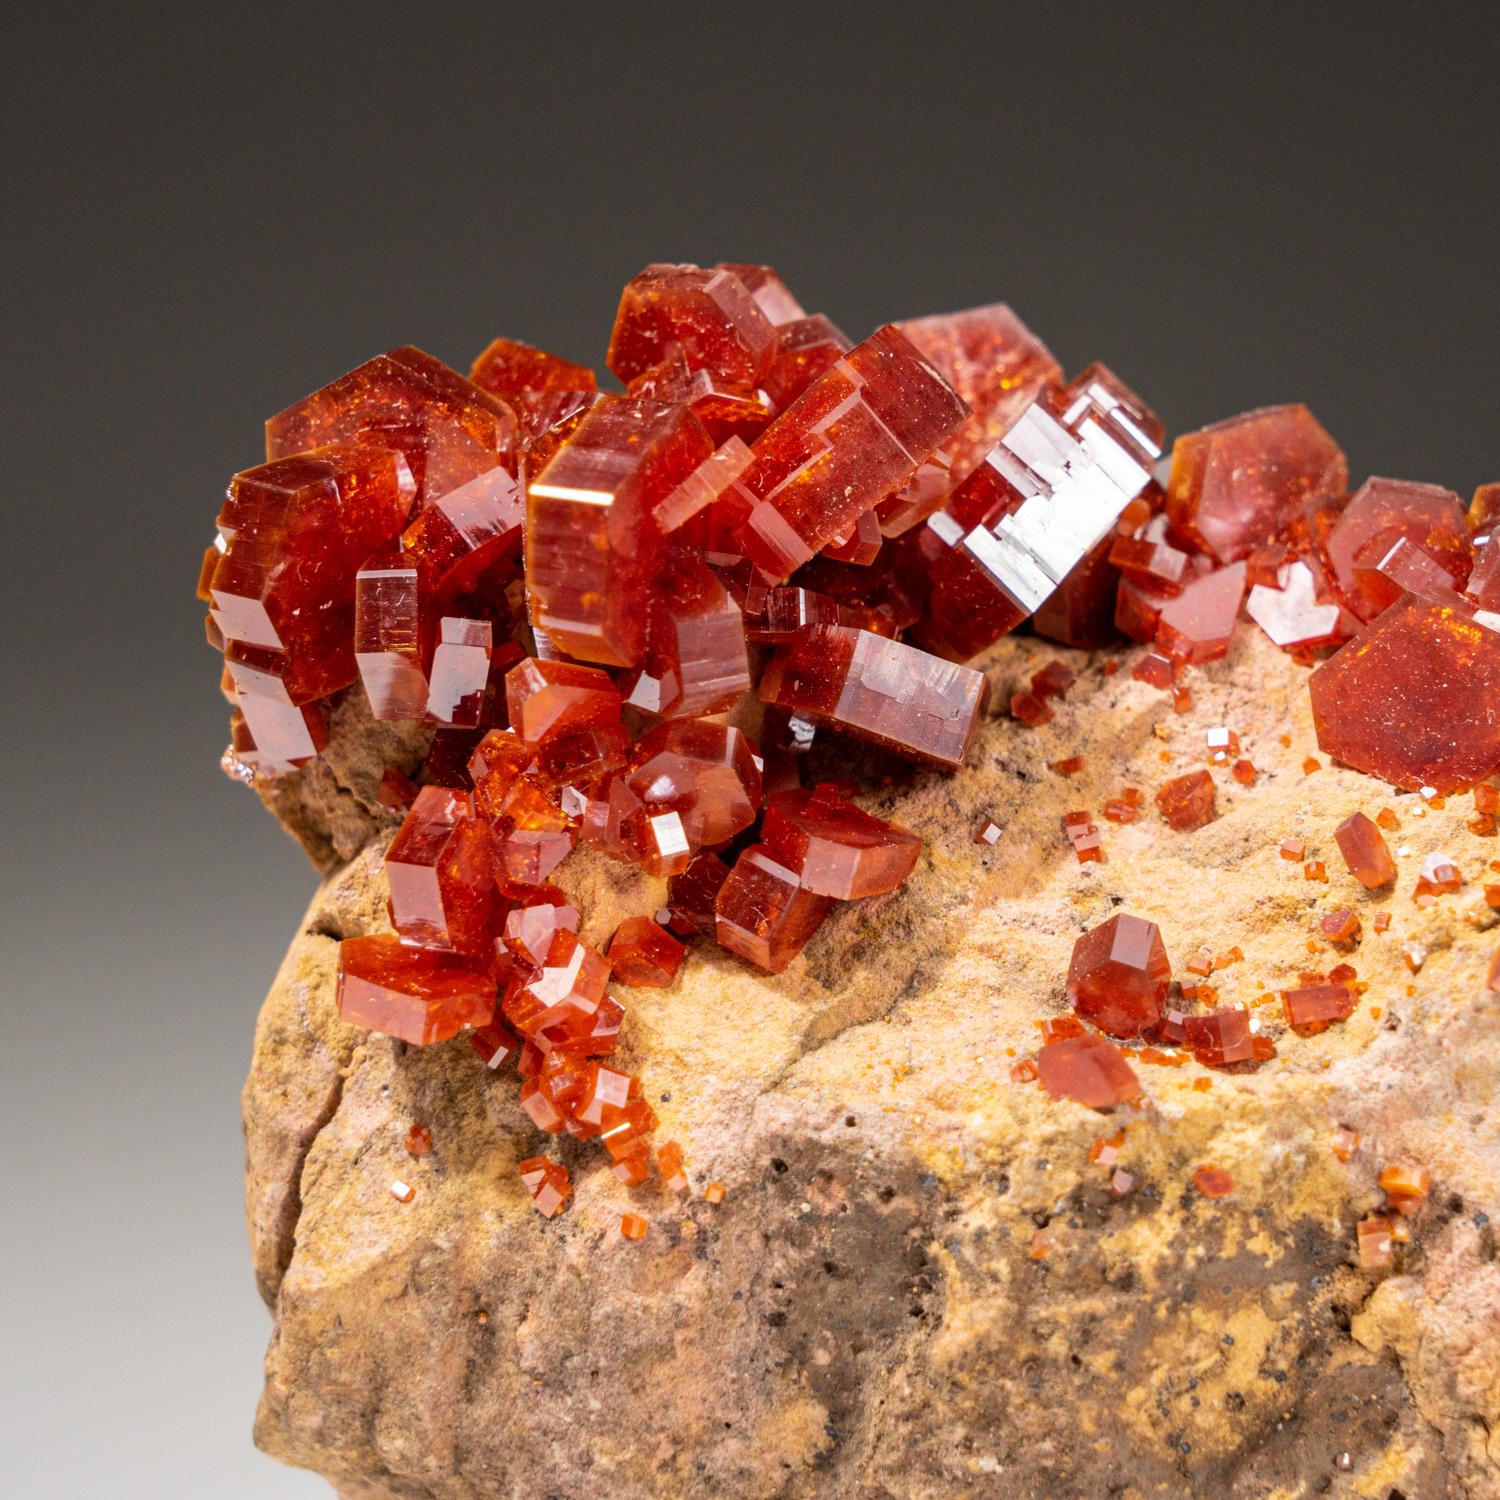 Moroccan Genuine Vanadinite Crystal Cluster on Matrix from Morocco (202.9 grams) For Sale